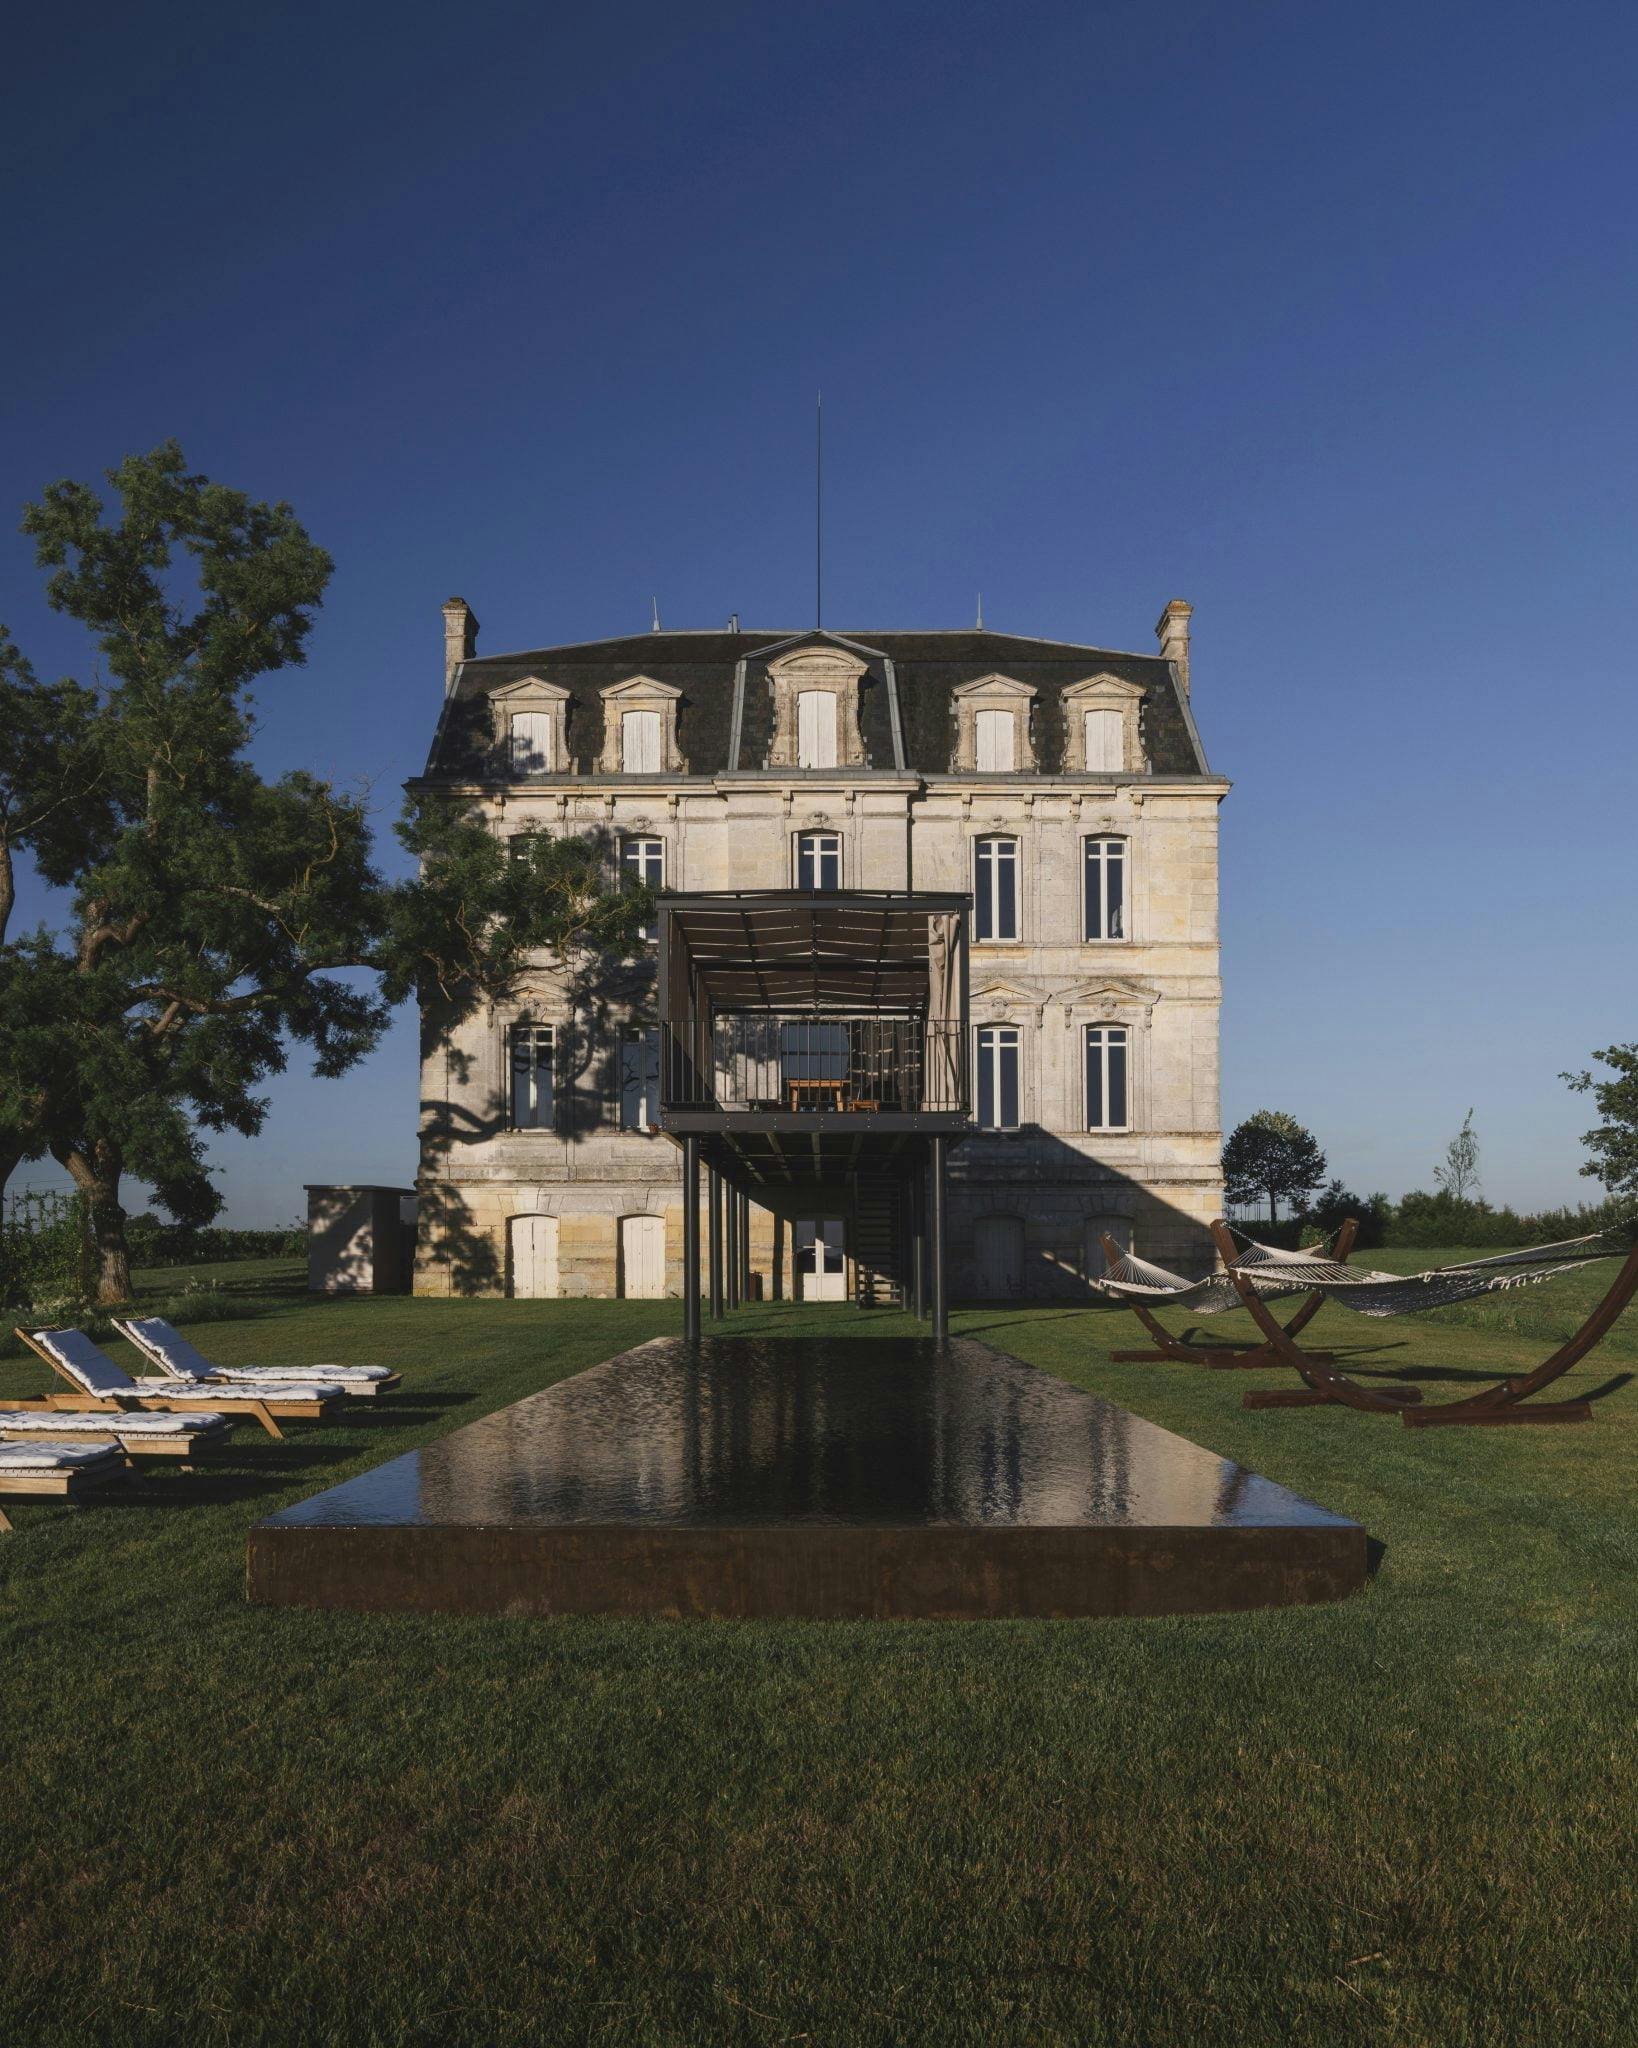 View of the château, swimming pool and garden